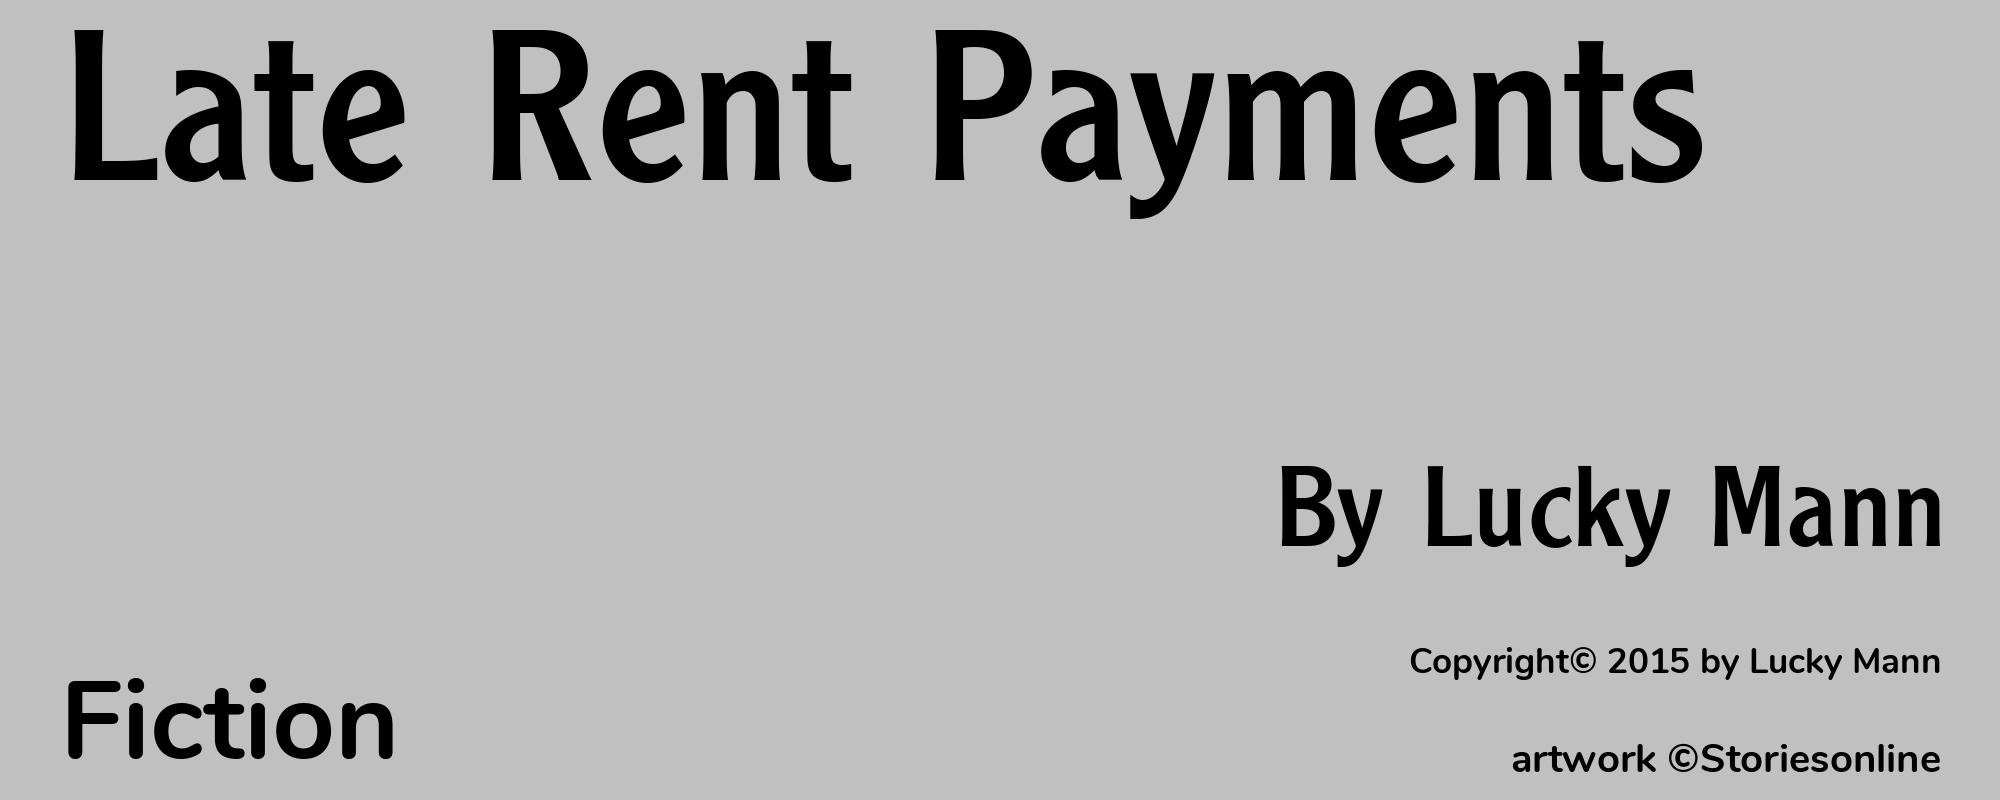 Late Rent Payments - Cover